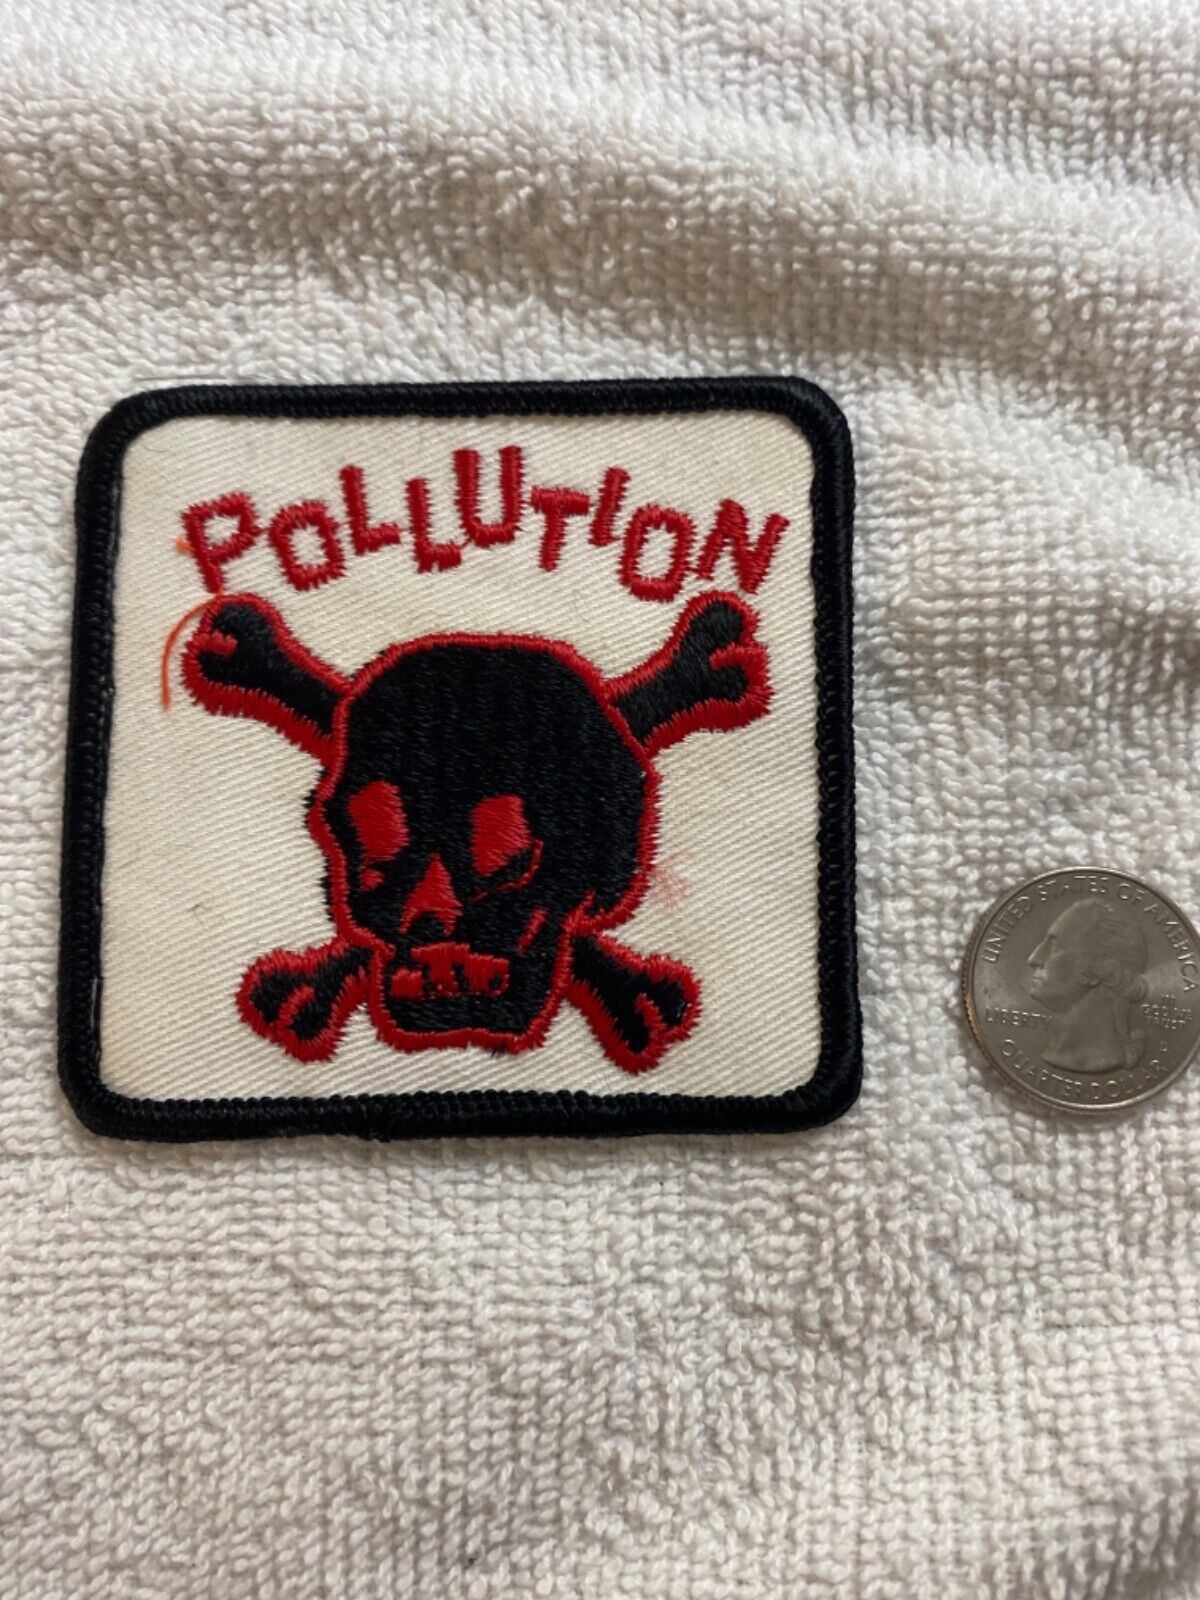 Vintage Early 1970’s “Pollution Skull Crossbones” Hippie Cloth Patch